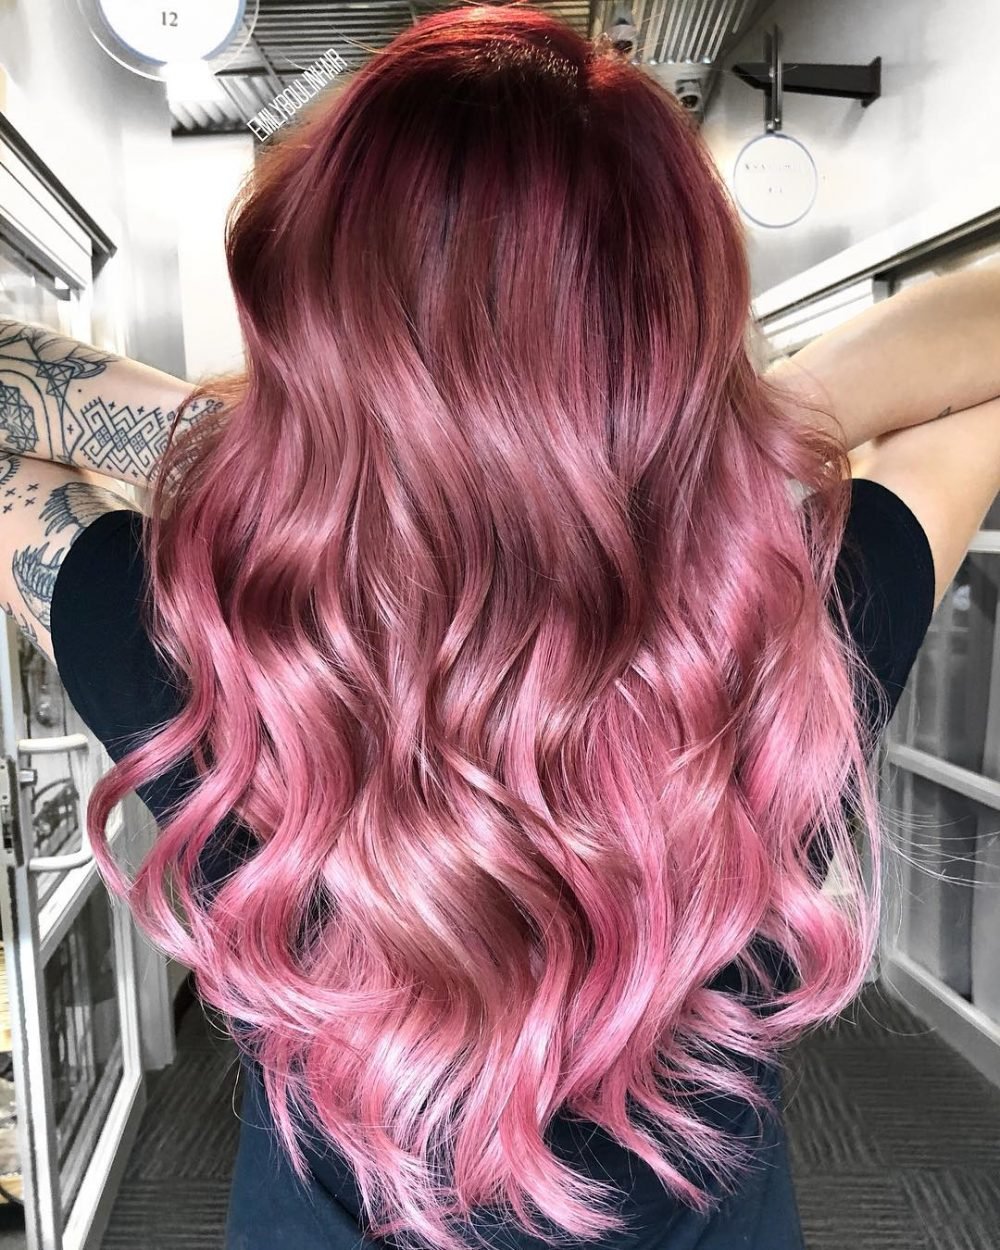 What to Consider Before Dyeing Your Hair Pink